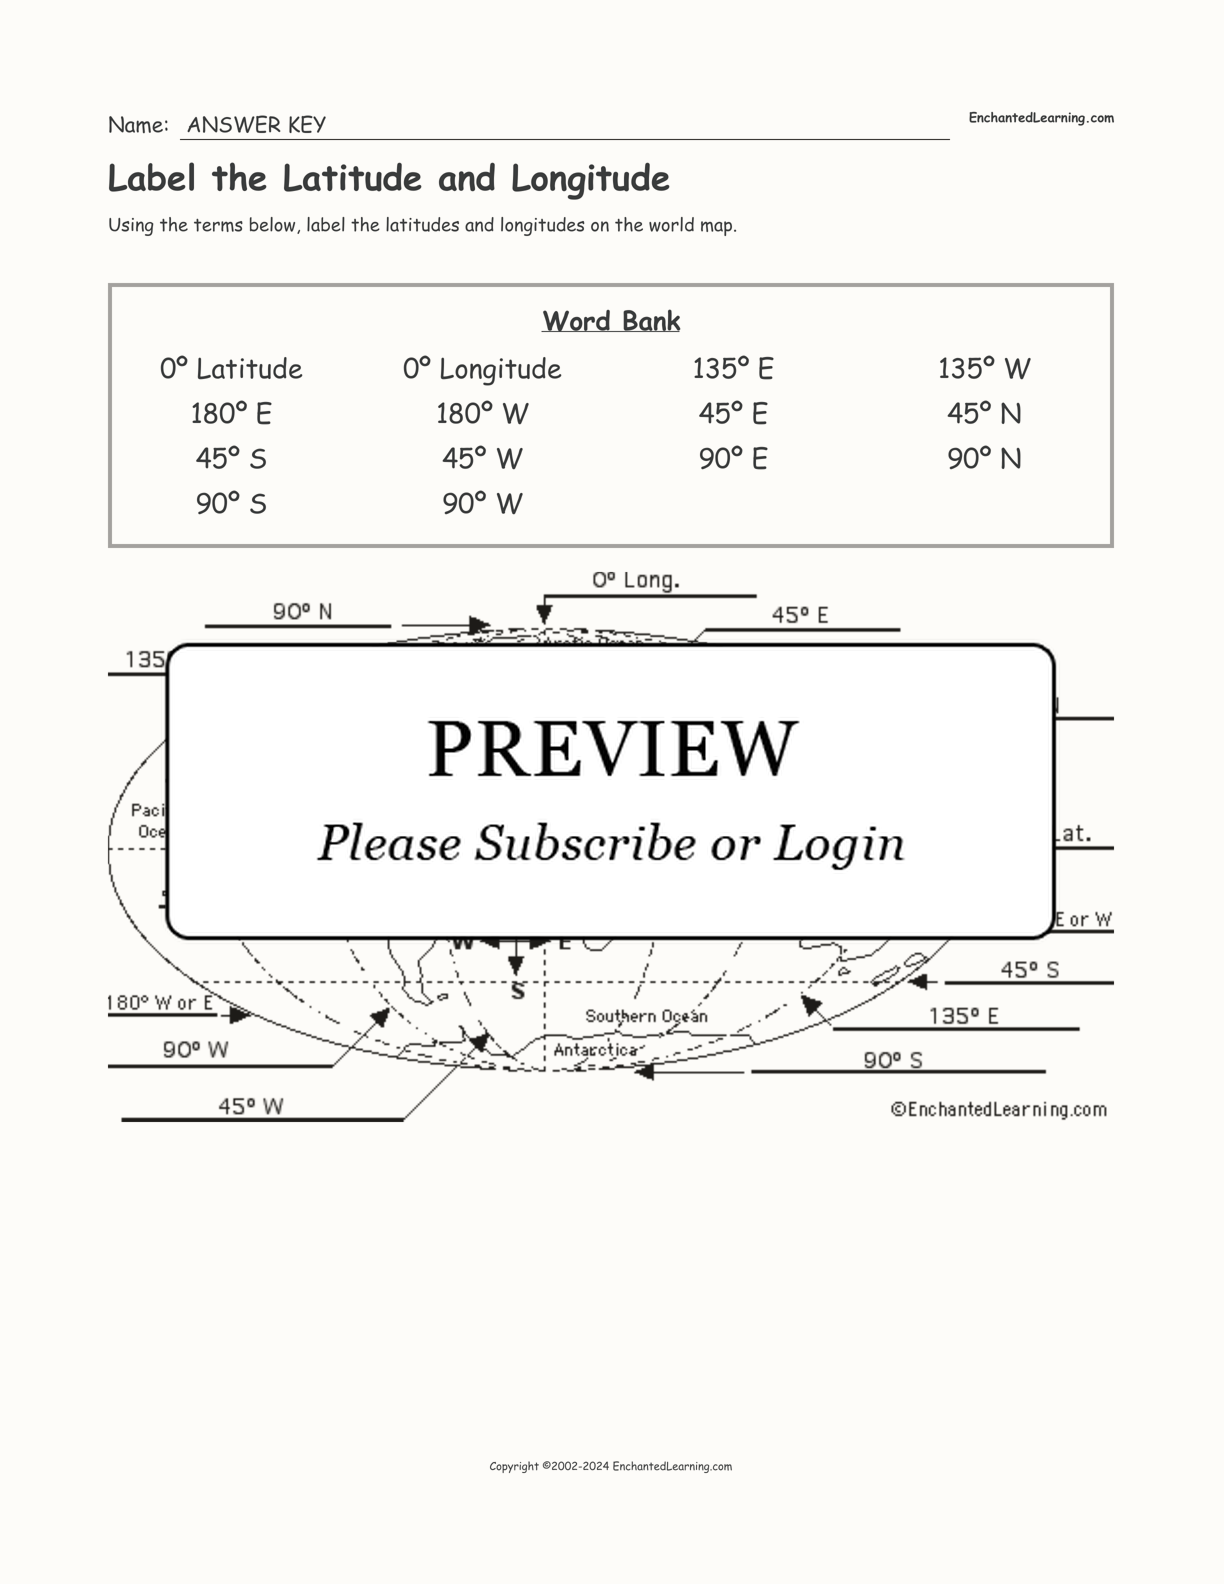 Label the Latitude and Longitude interactive worksheet page 2